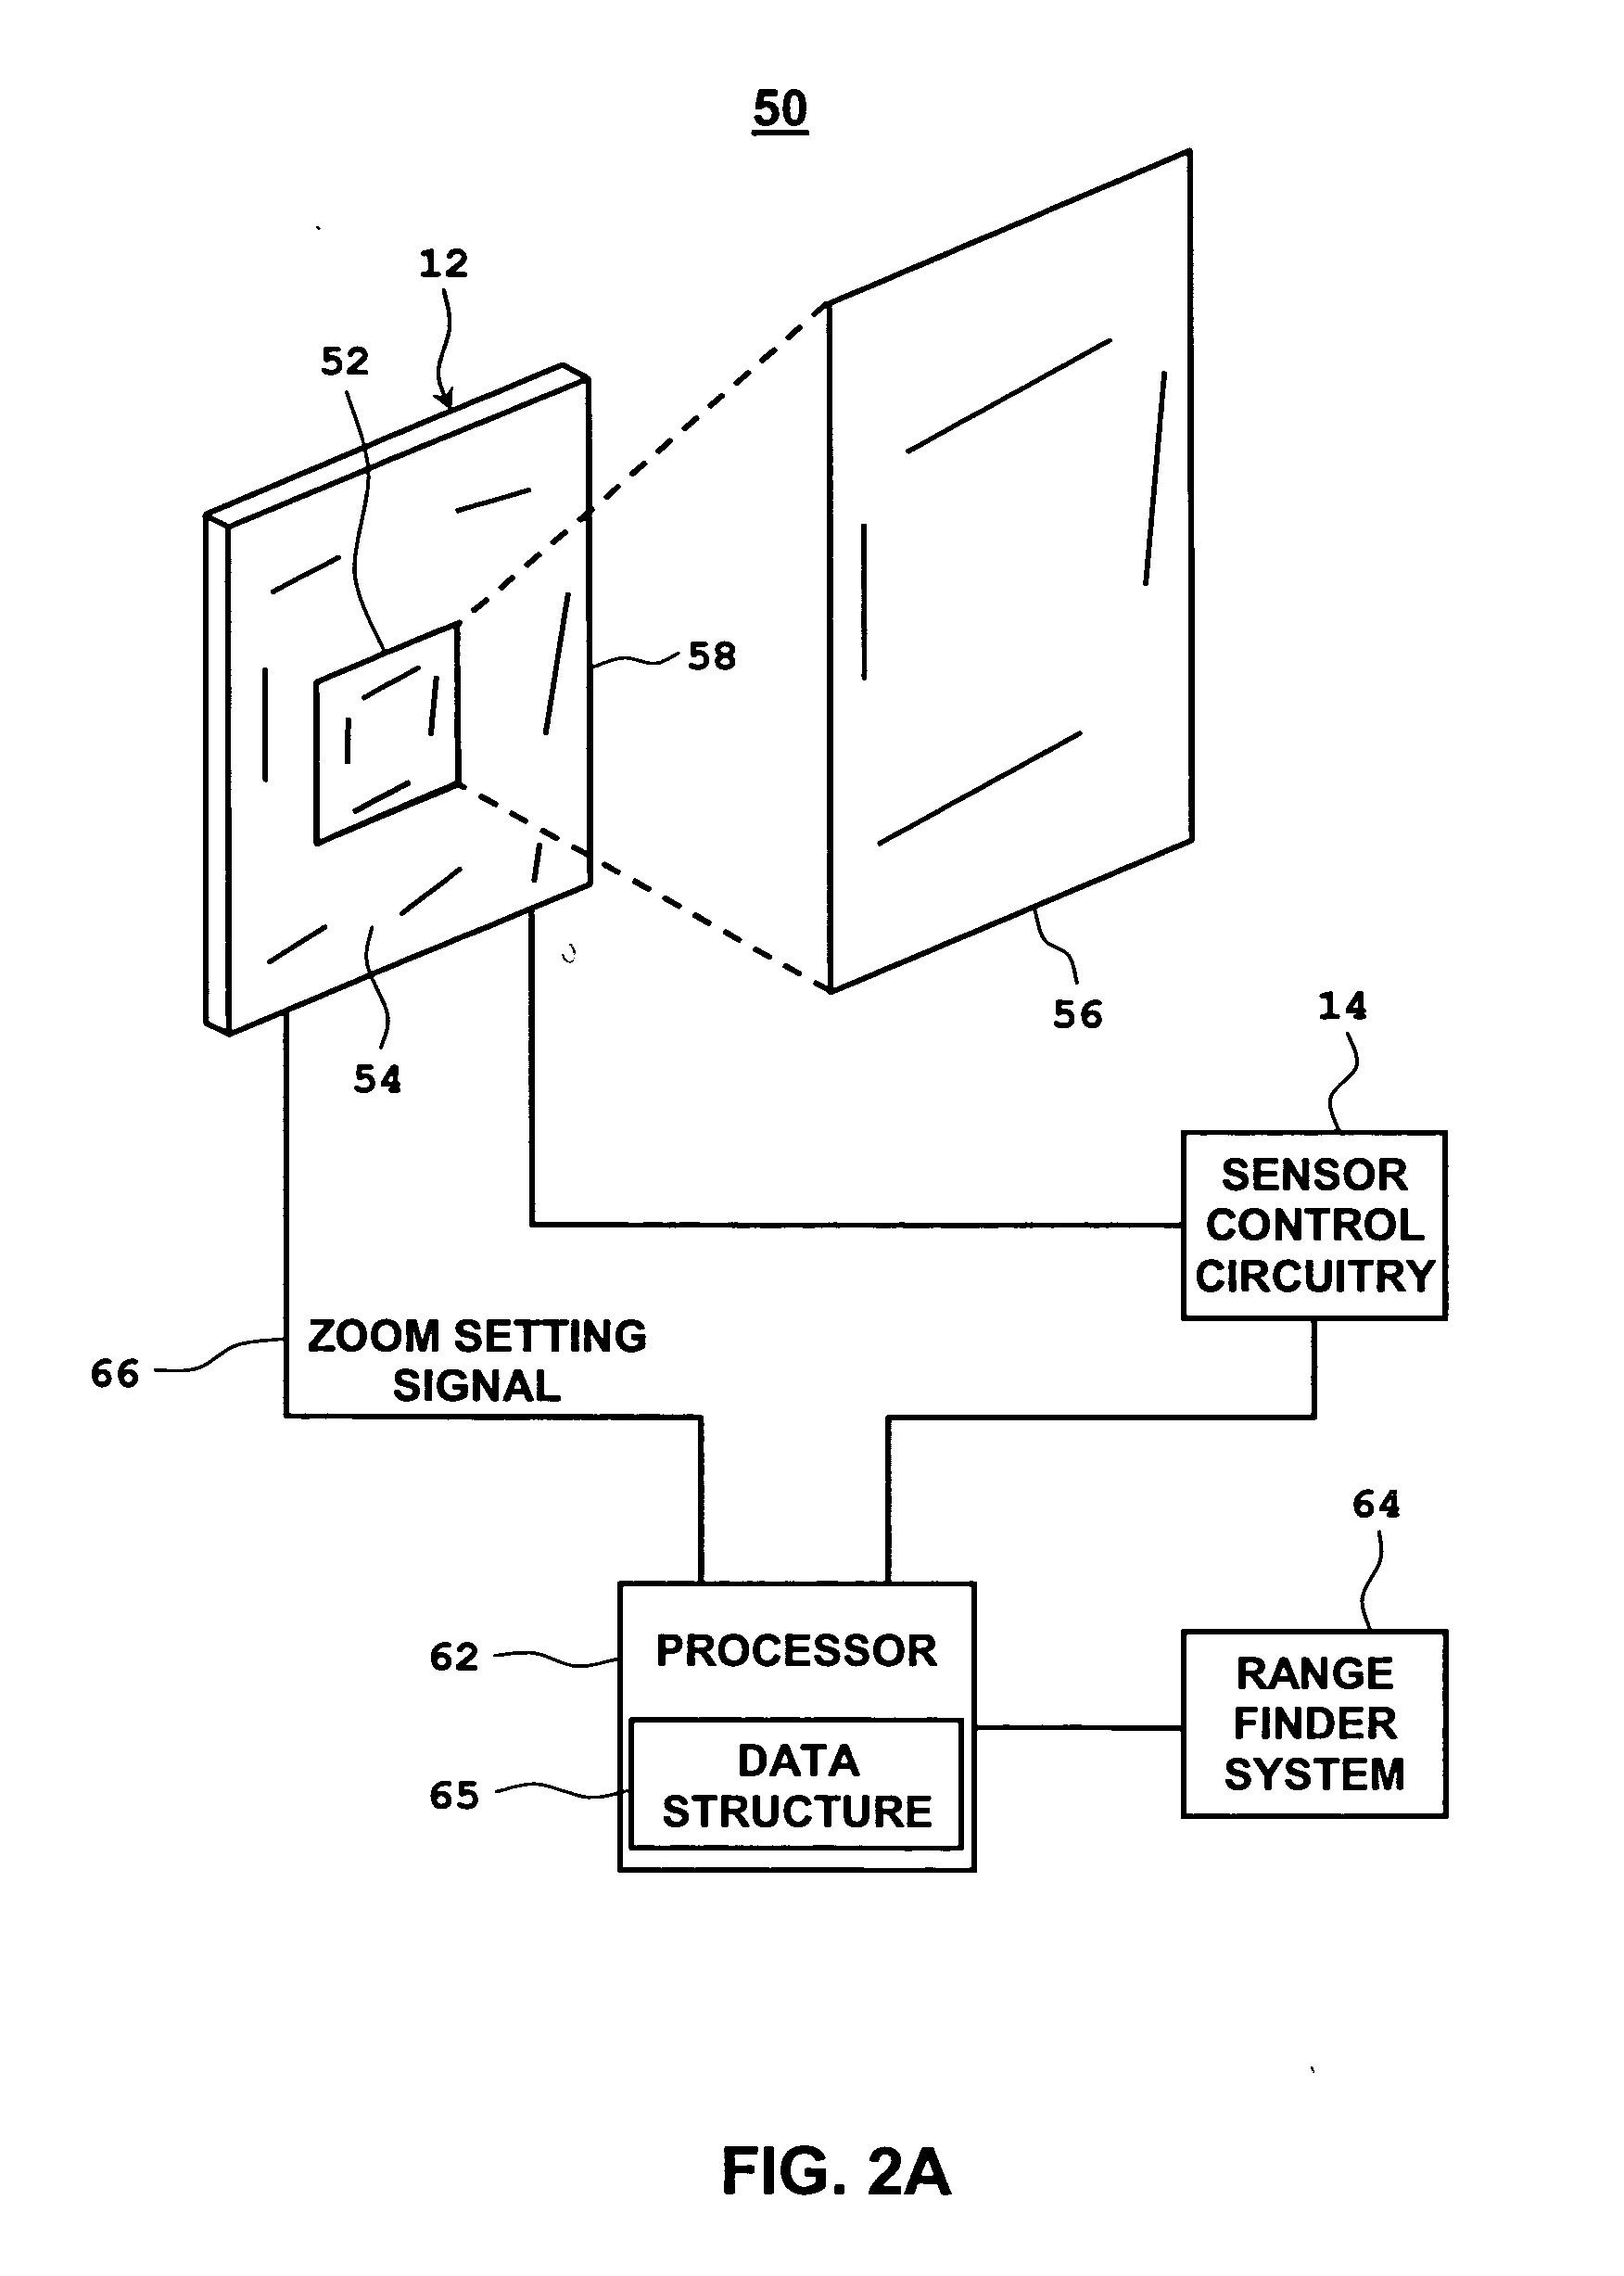 Optical code reading system and method for processing multiple resolution representations of an image